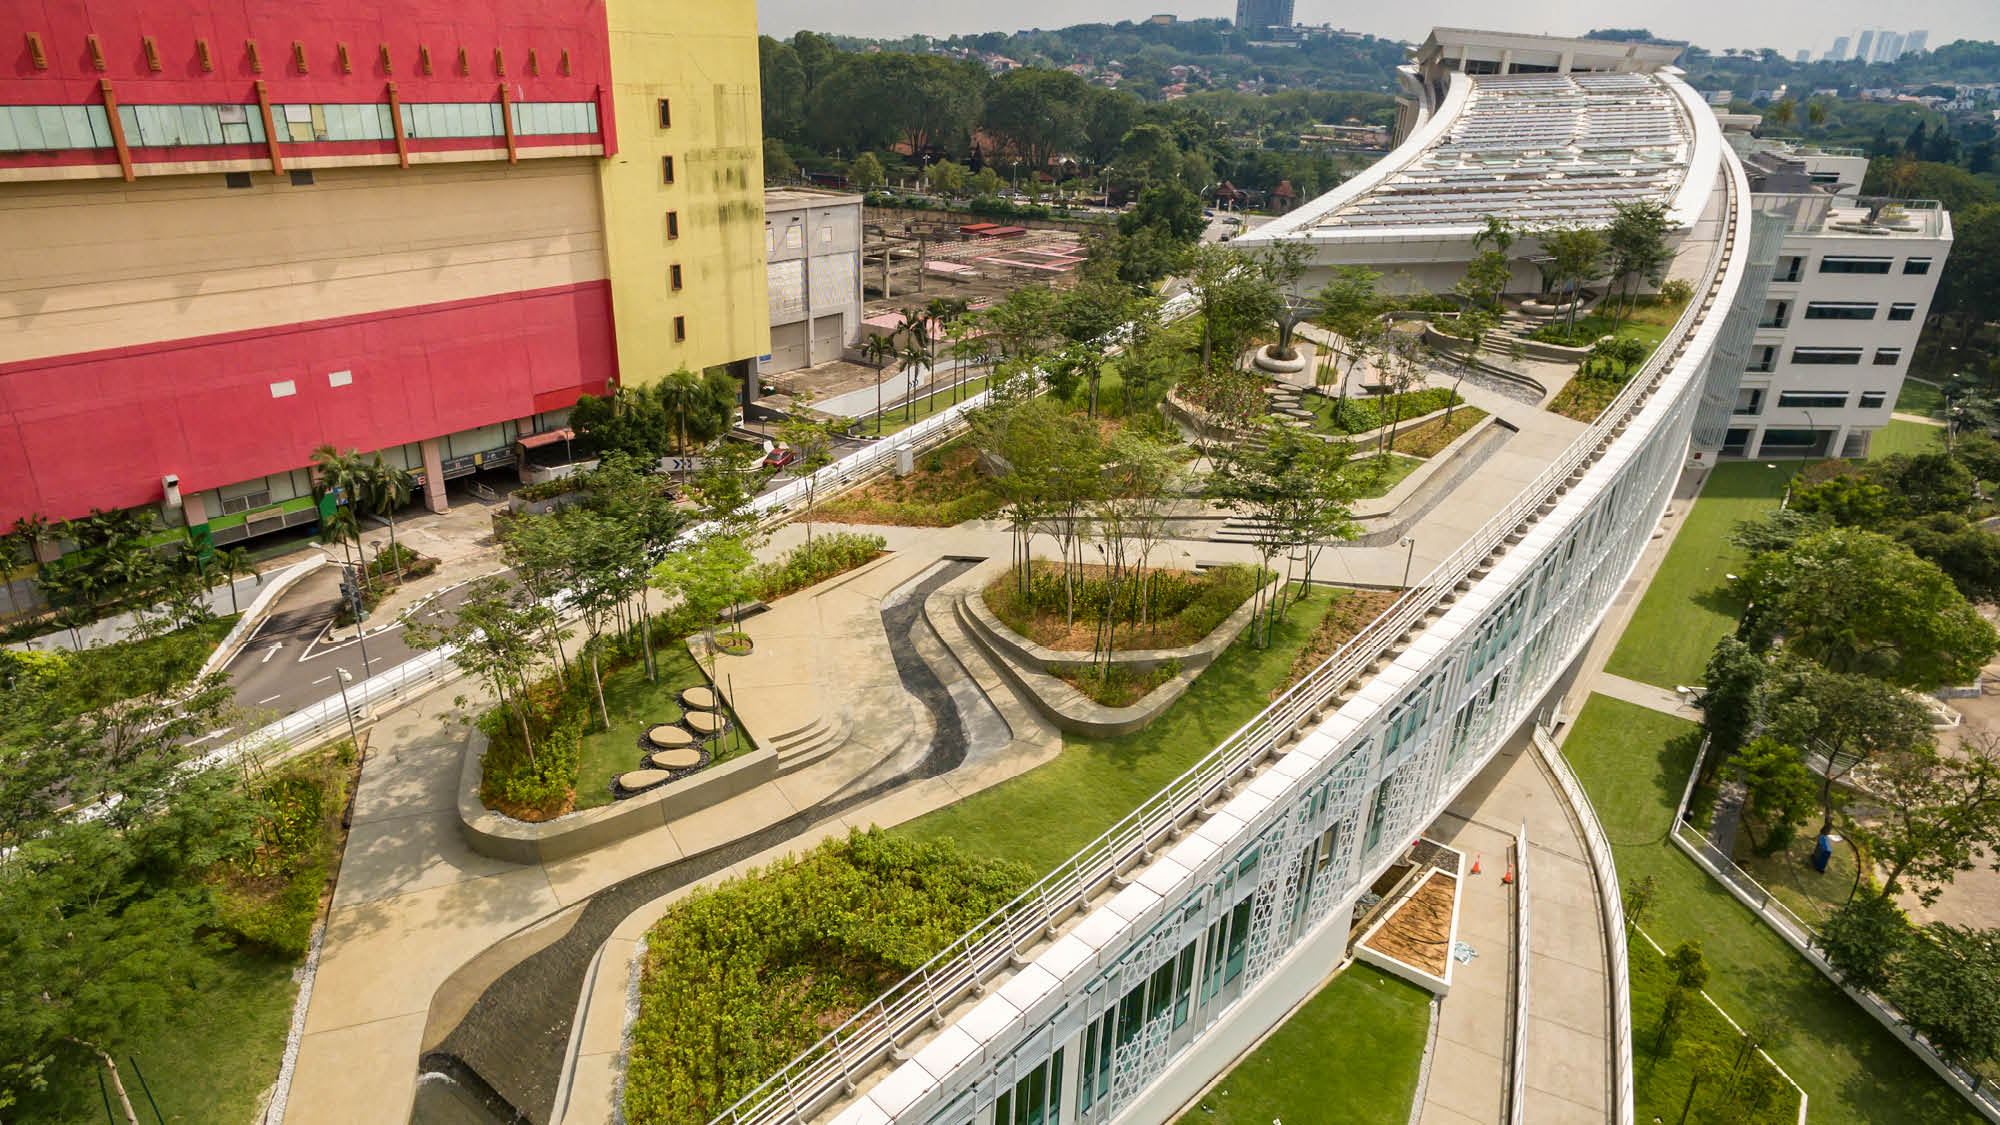 2853m2 rooftop garden at the top of the last block of PKNS © Arup